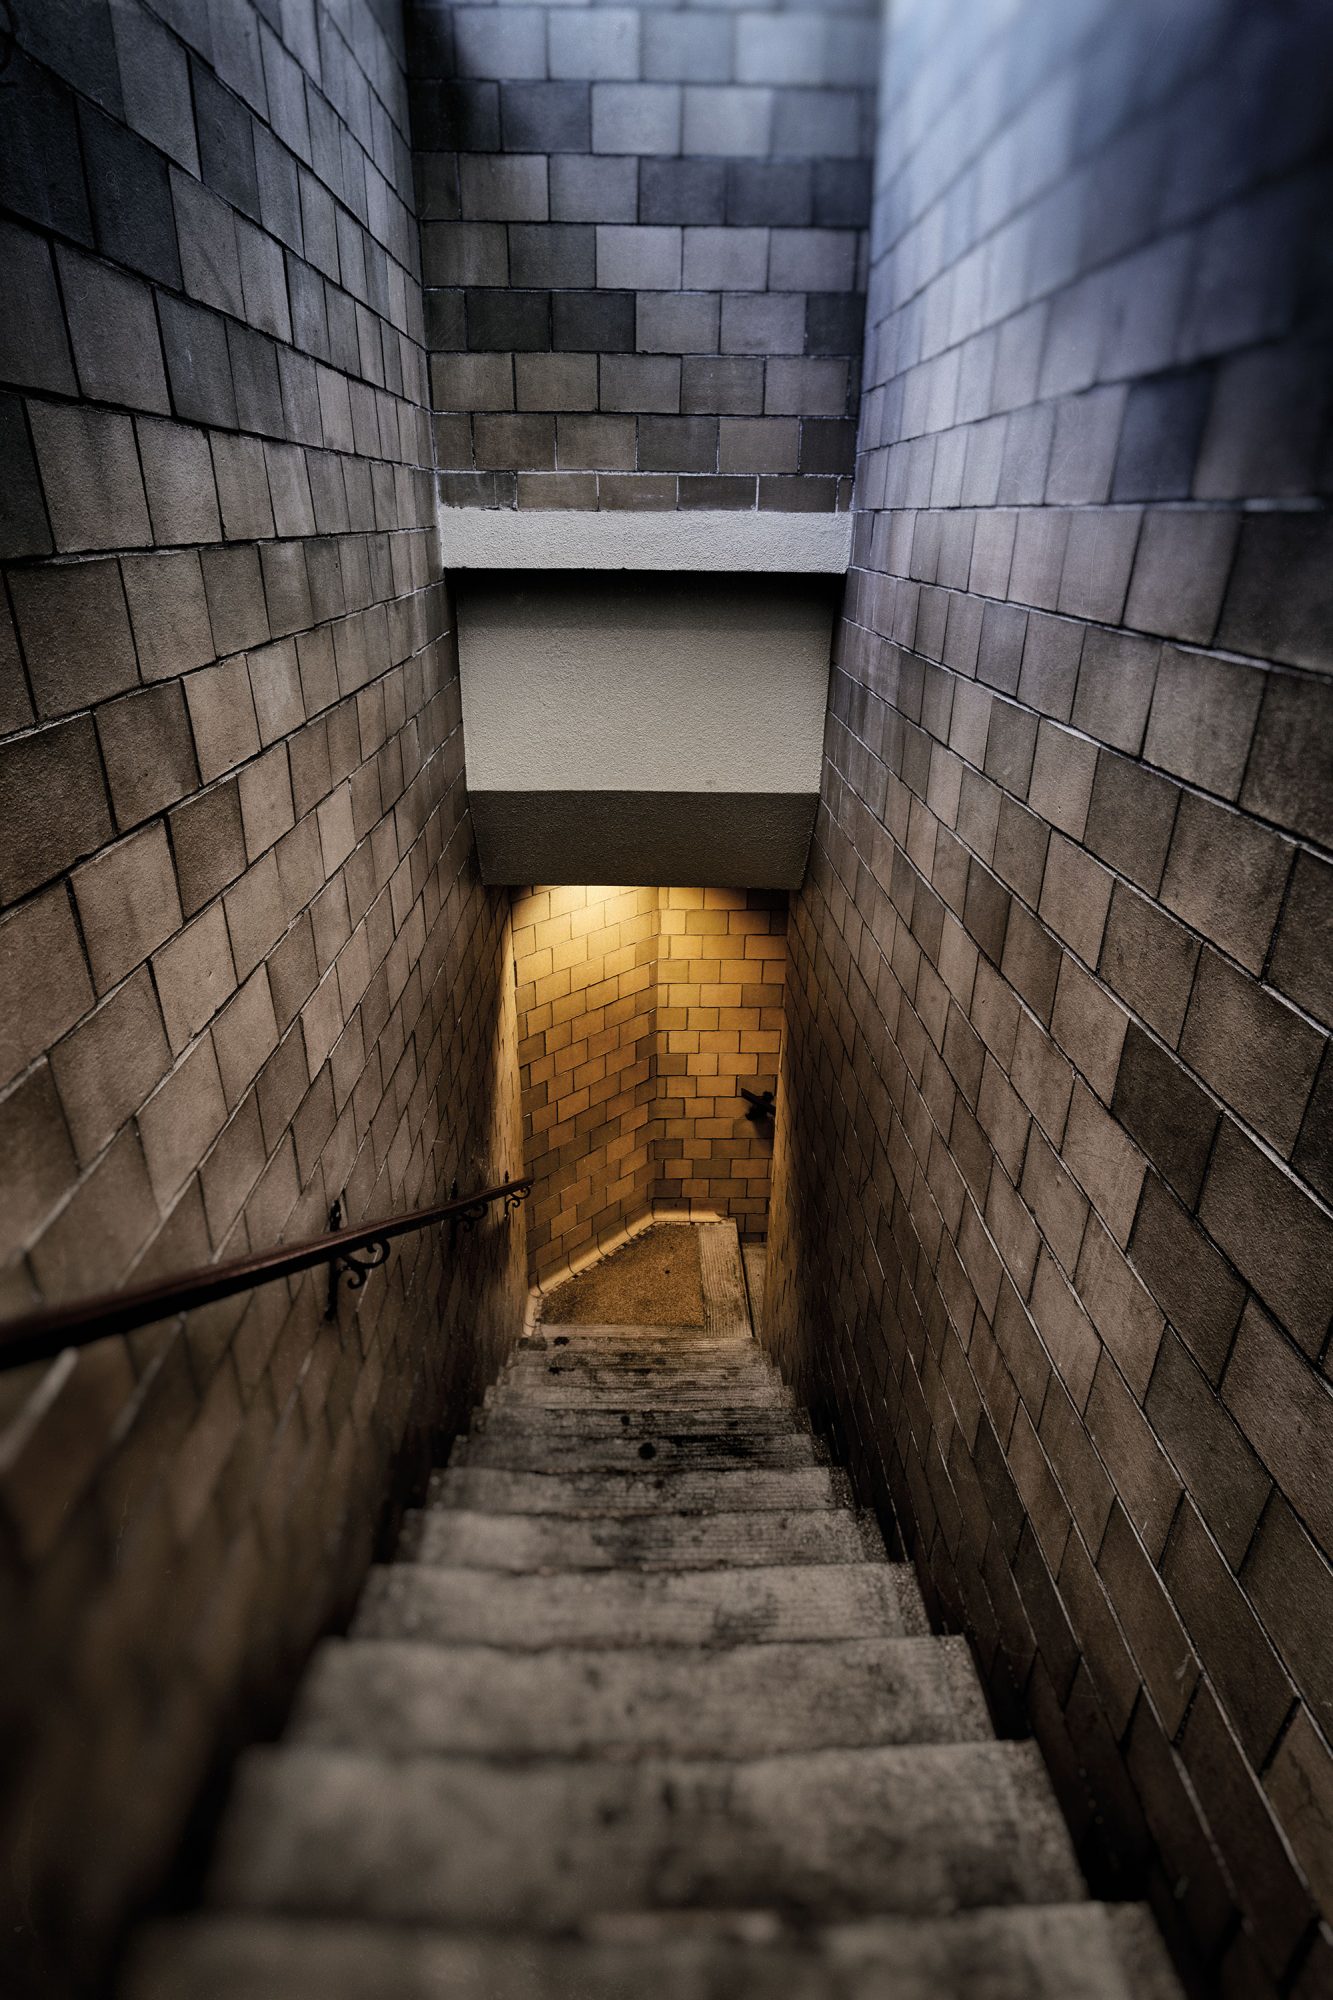 Tall concrete-brick walls line a gray staircase down to a room illuminated by a yellow light